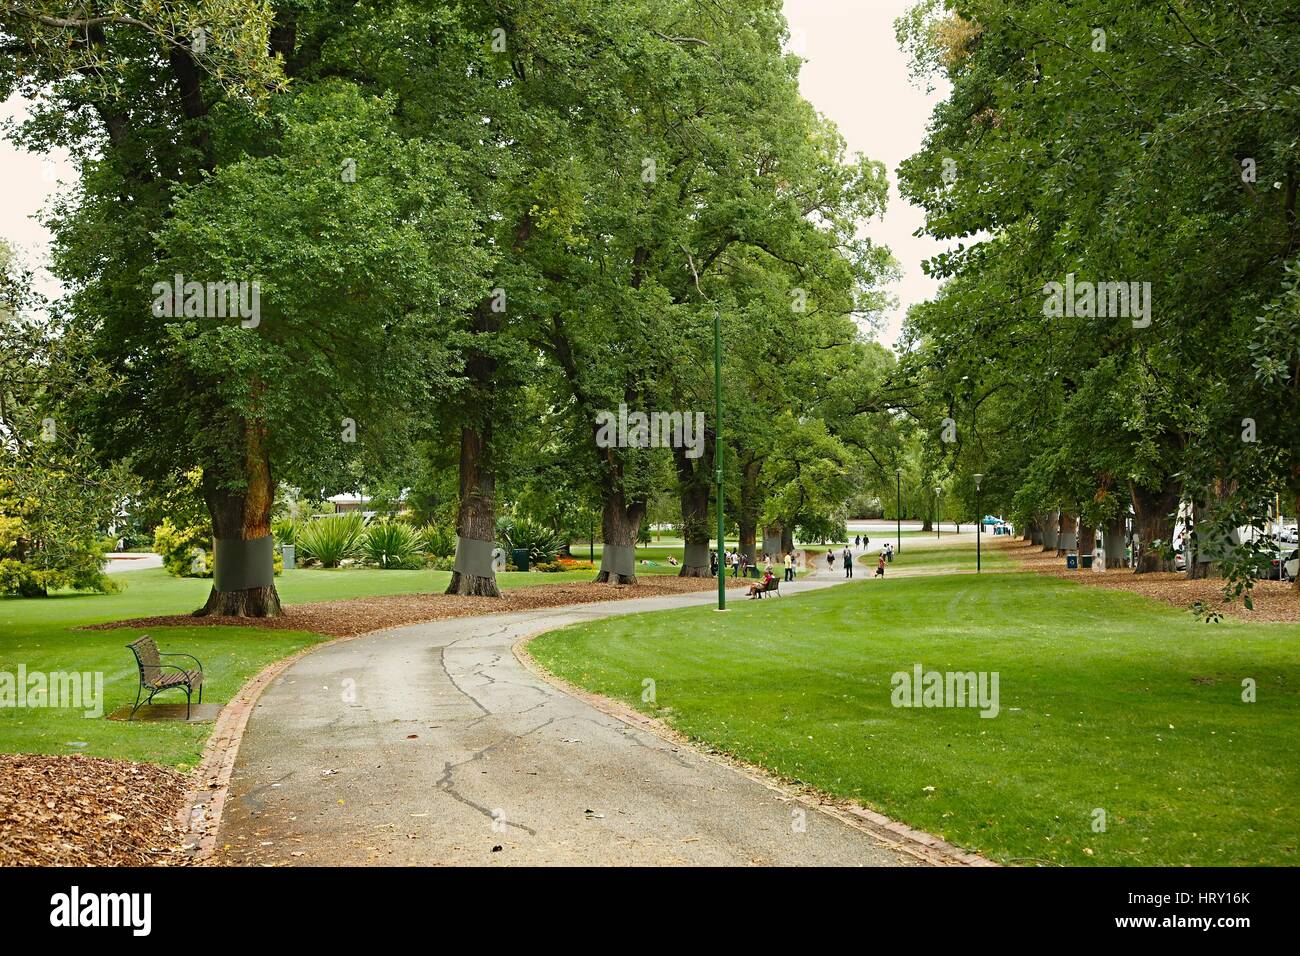 Green park with trees Stock Photo